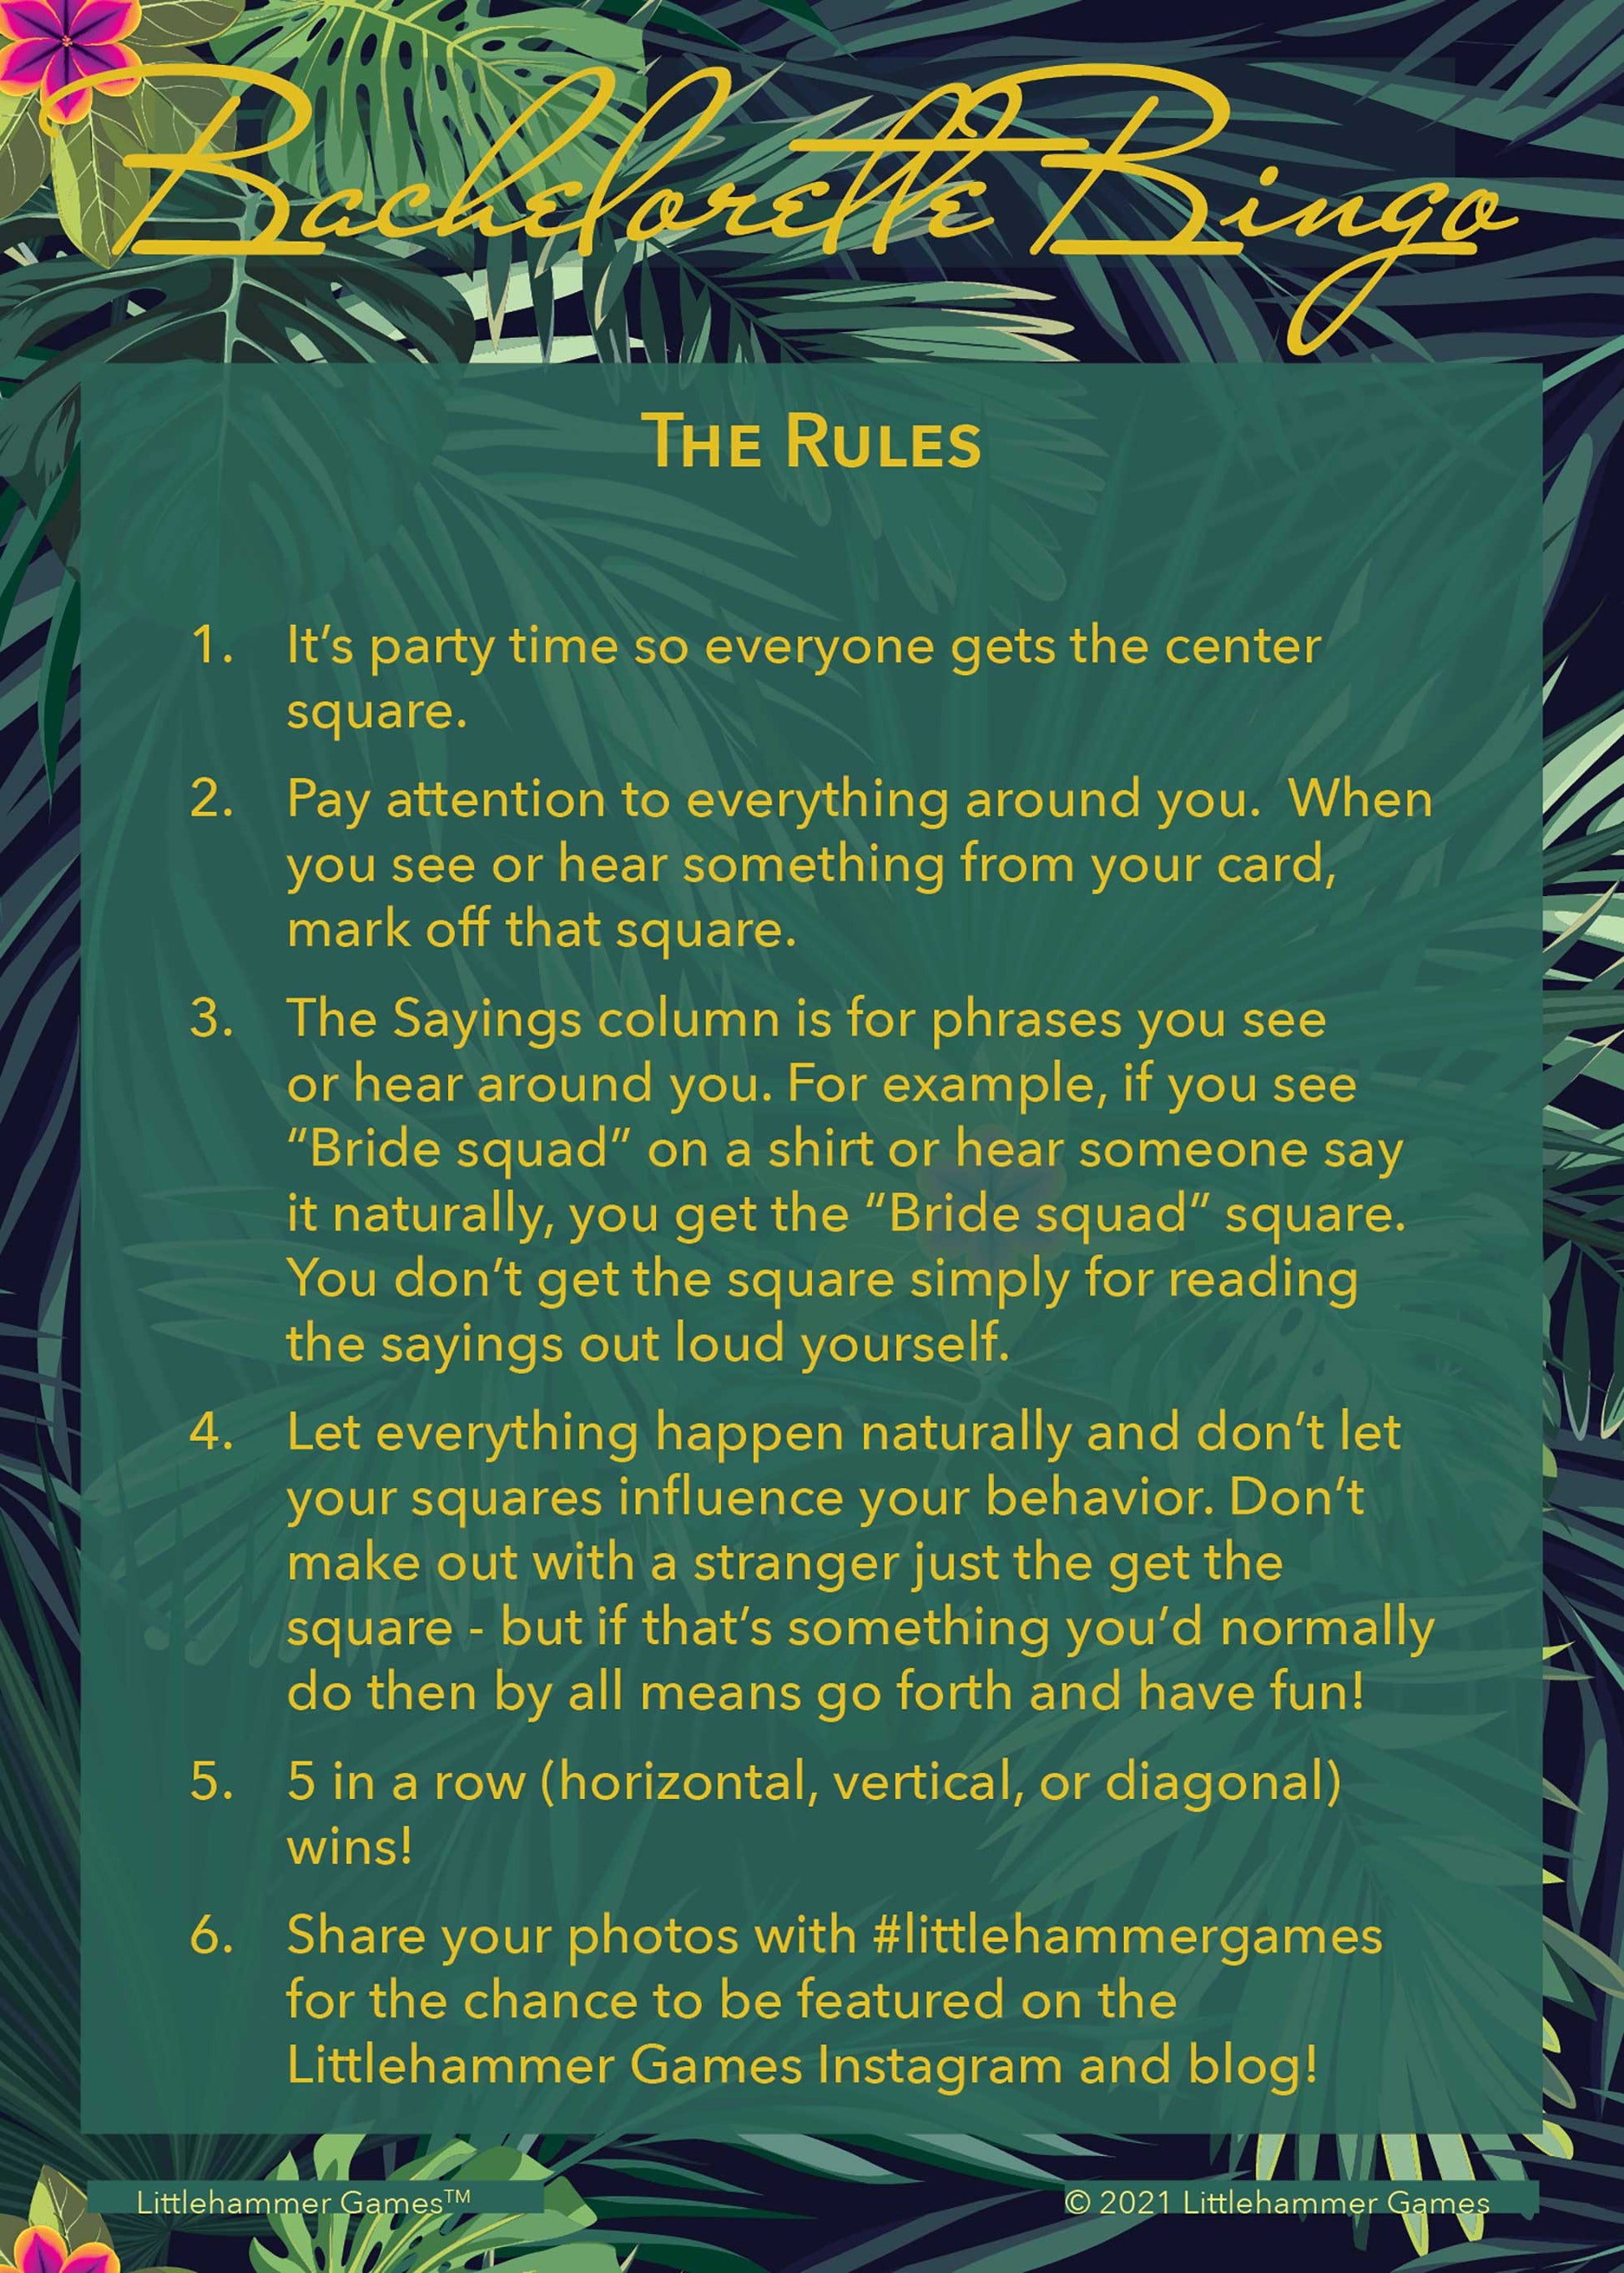 Bachelorette Bingo rules card with gold text on a tropical background